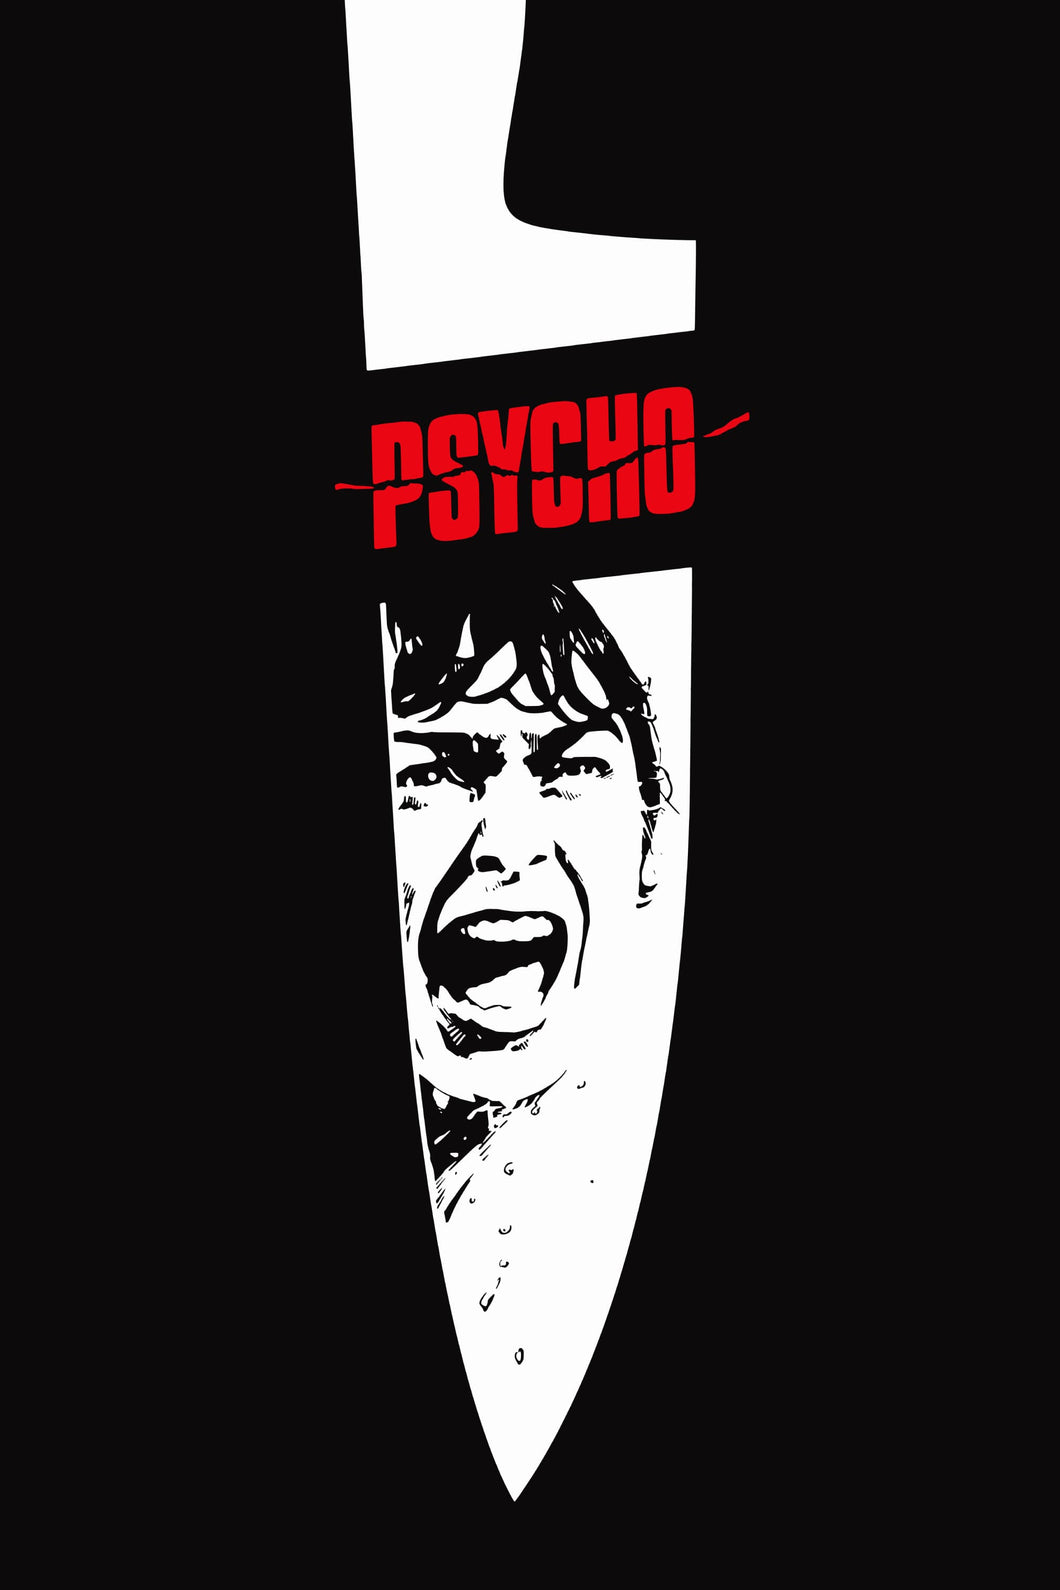 Psycho Movie Poster Framed or Unframed Glossy Poster Free UK Shipping!!!